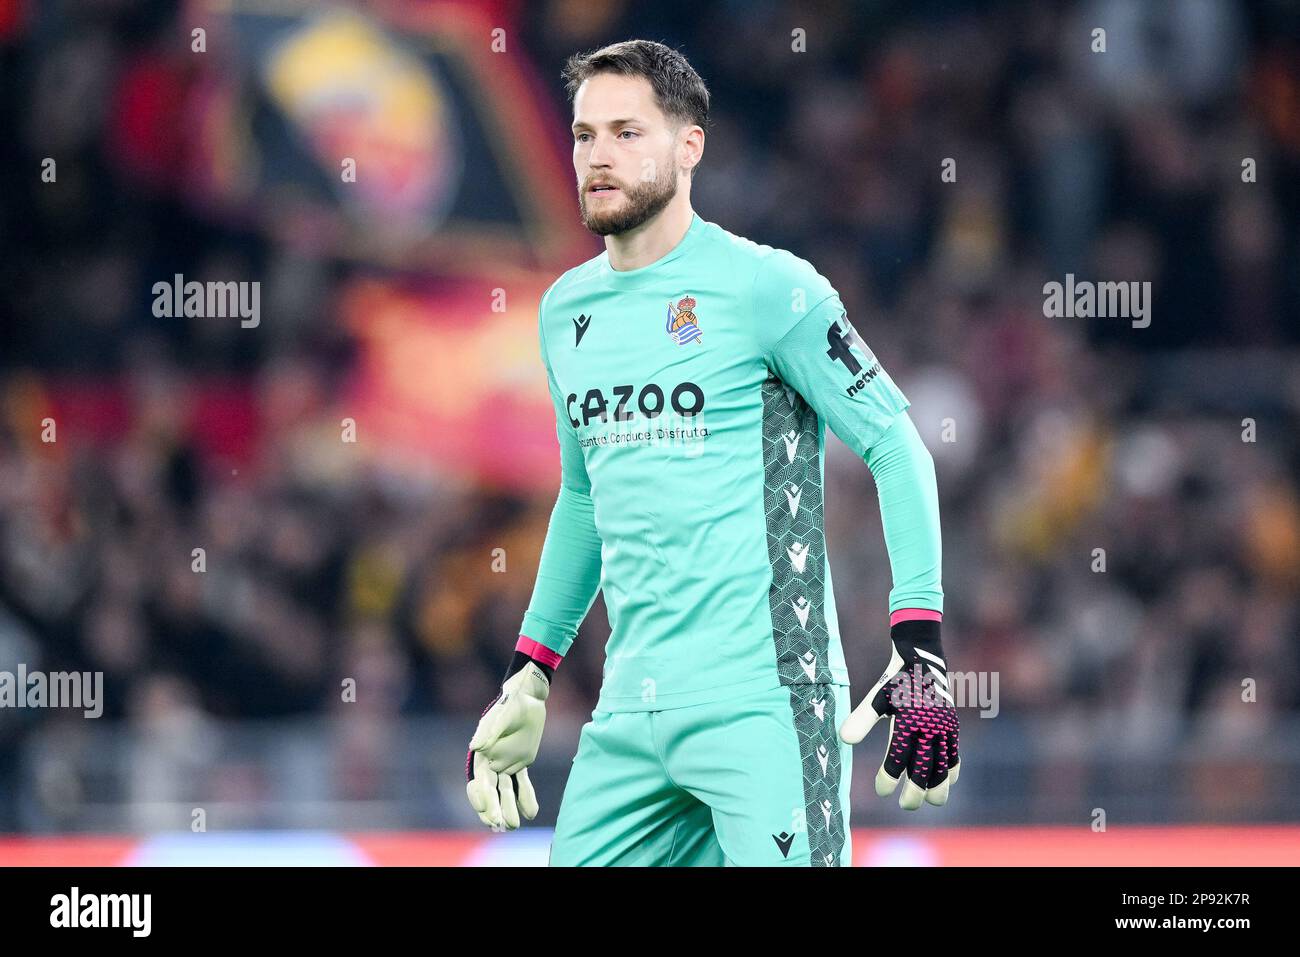 Rome, Italy. 24th Feb, 2023. Alejandro Remiro of Real Sociedad looks on during the UEFA Europa League round of 16 leg one match between Roma and Real Sociedad at Stadio Olimpico, Rome, Italy on 9 March 2023. Credit: Giuseppe Maffia/Alamy Live News Stock Photo